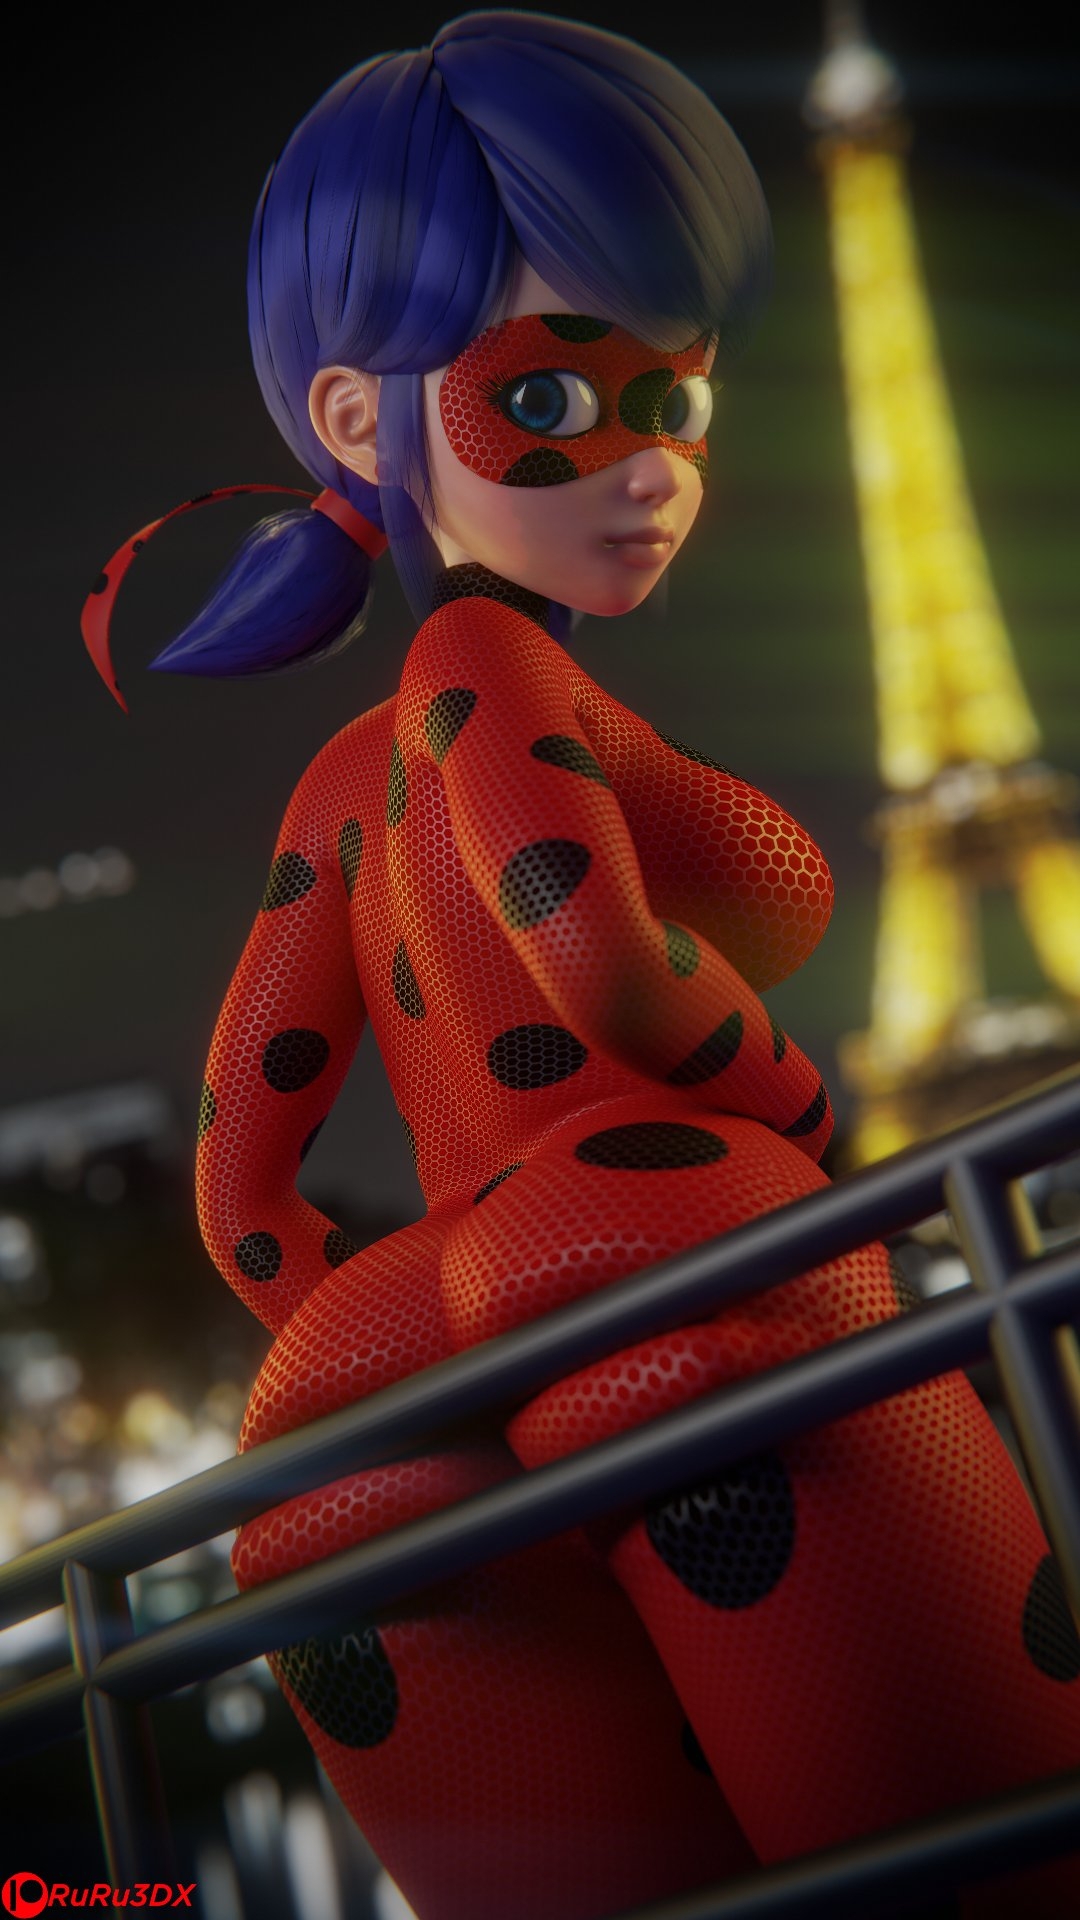 Lady Bug Ladybug Bubble Butt Tight Clothes Looking At Viewer